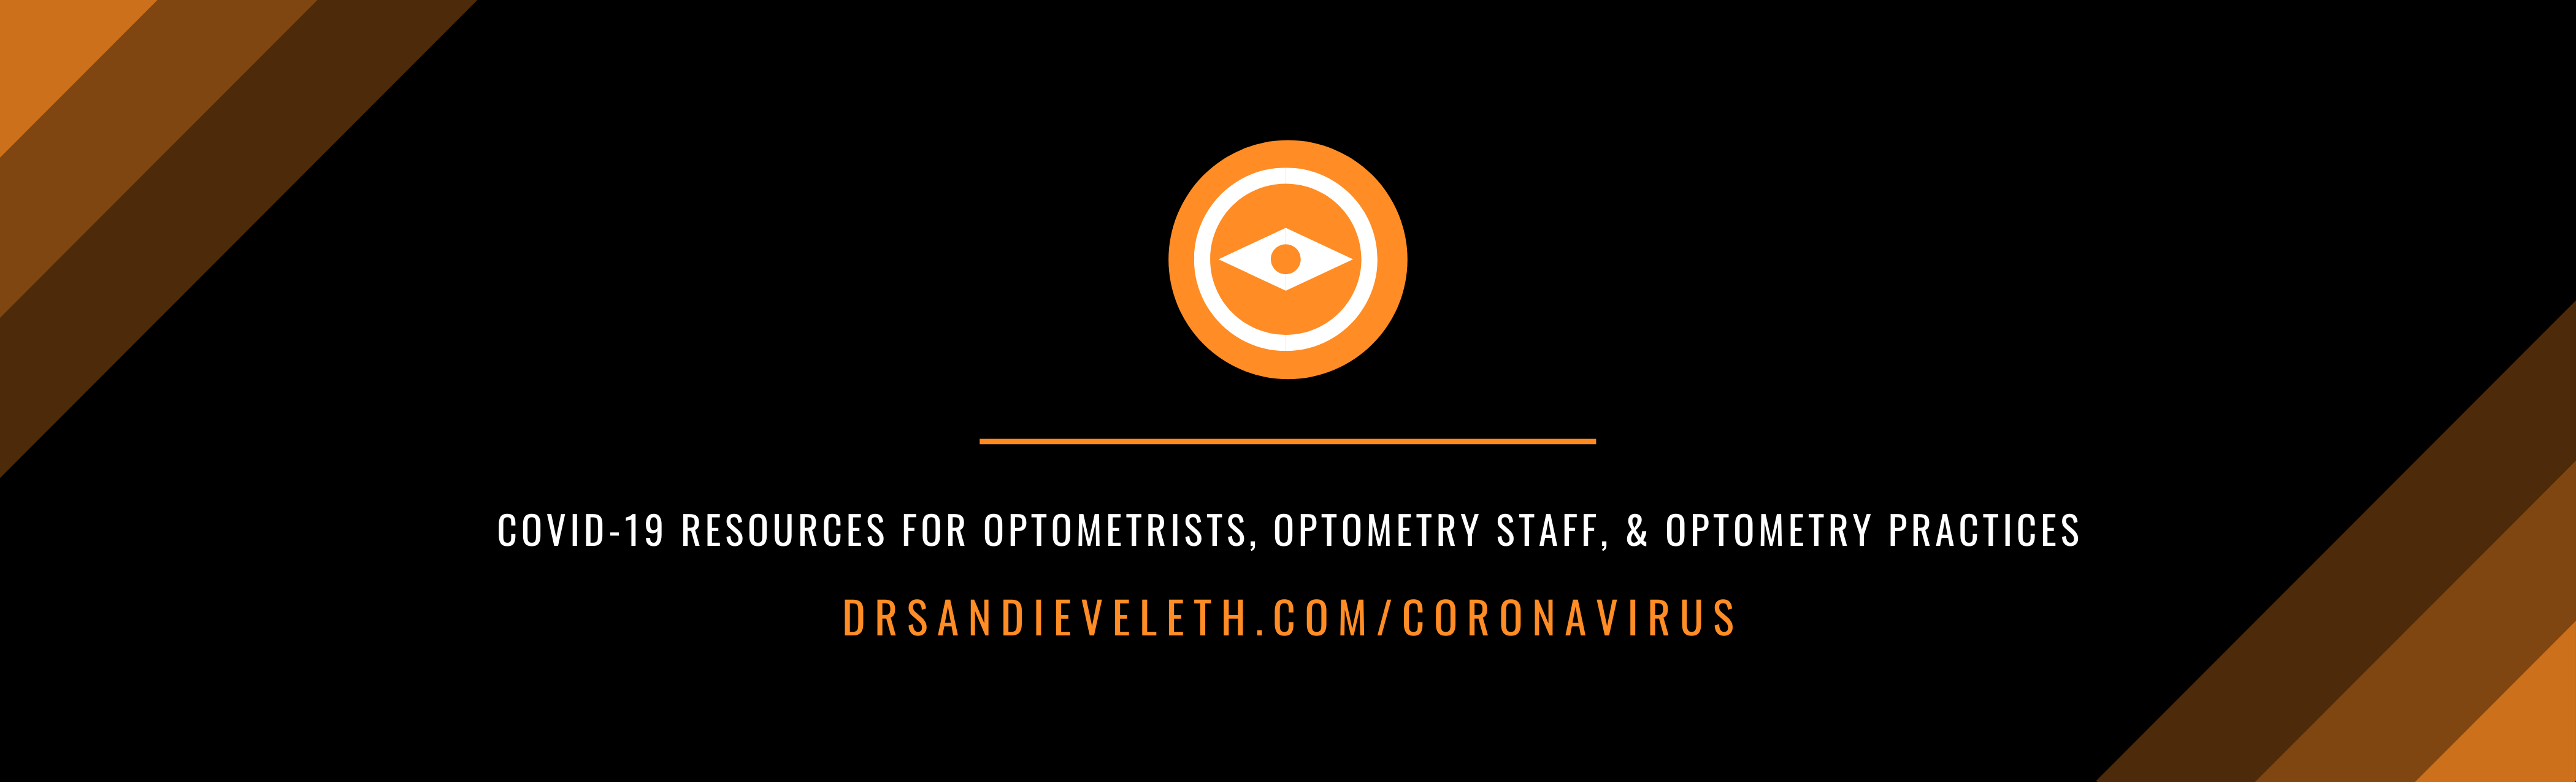 COVID19 Resources for Optometrists